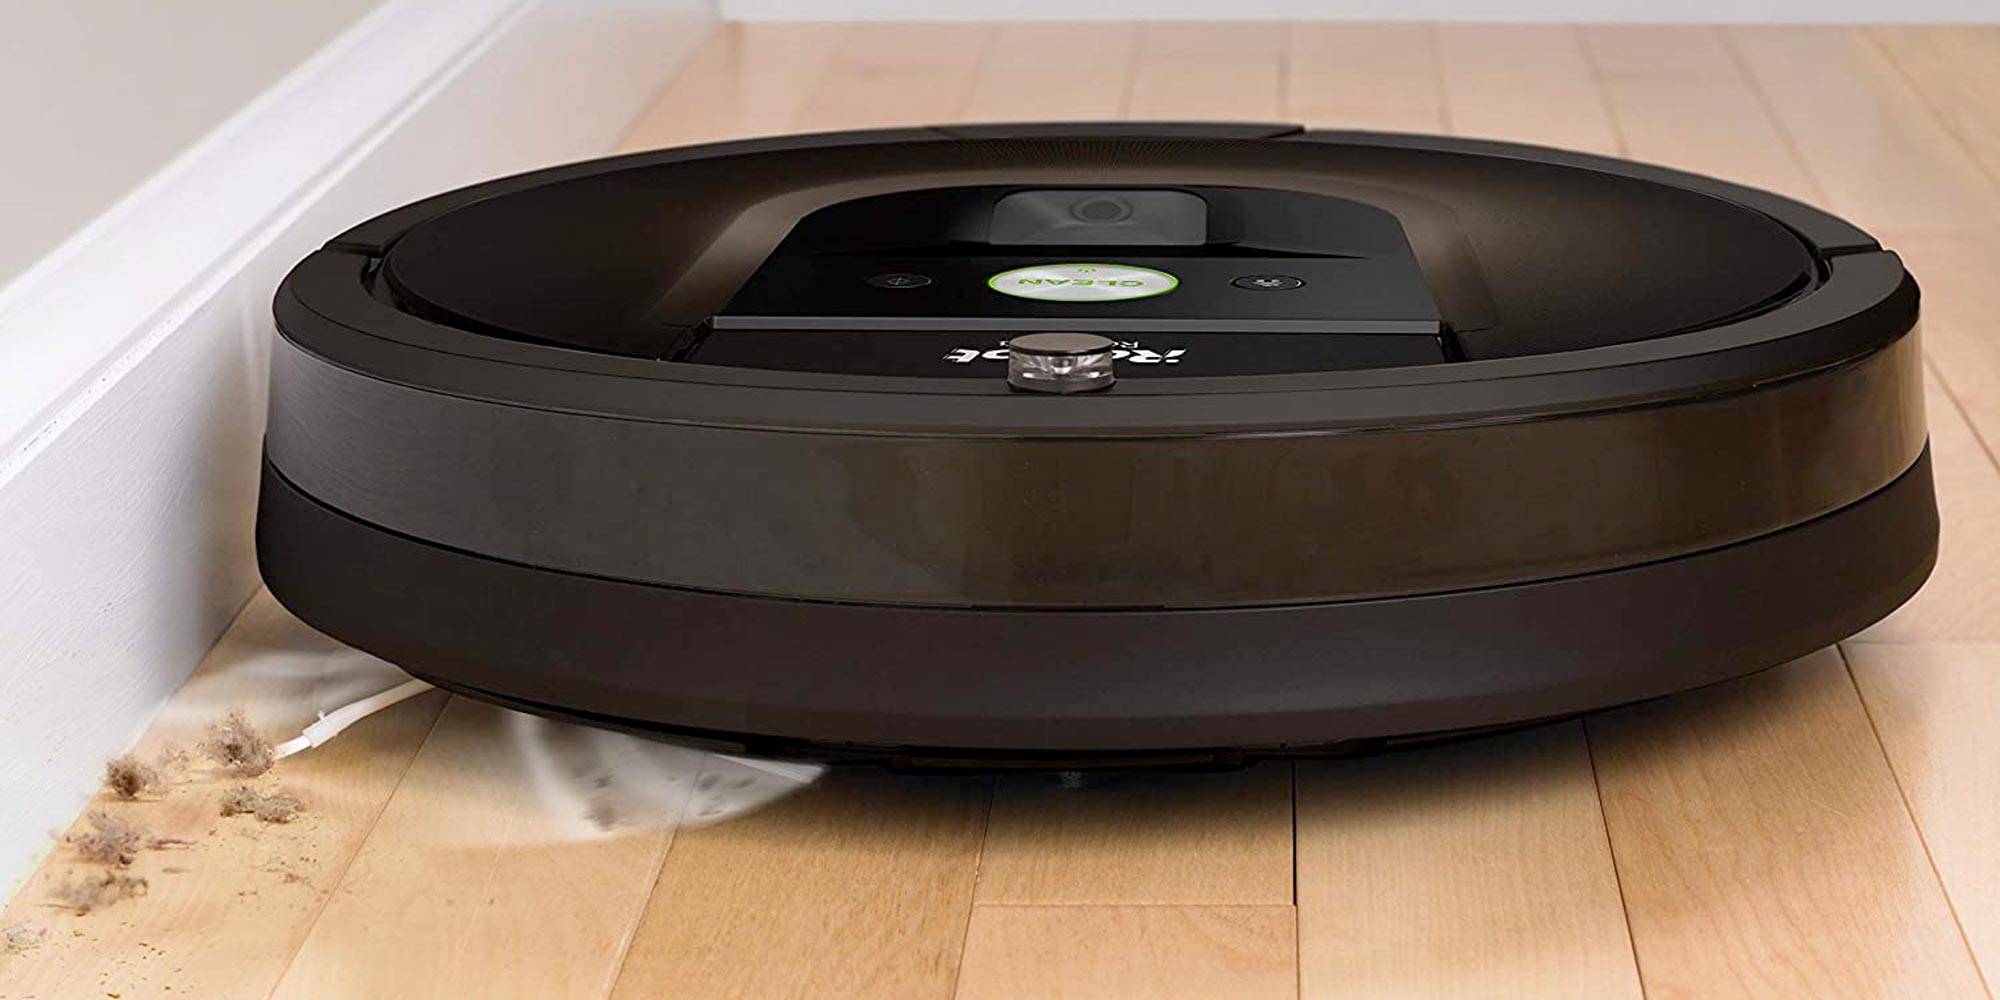 iRobot's Roomba 981 maps your home and learns your habits